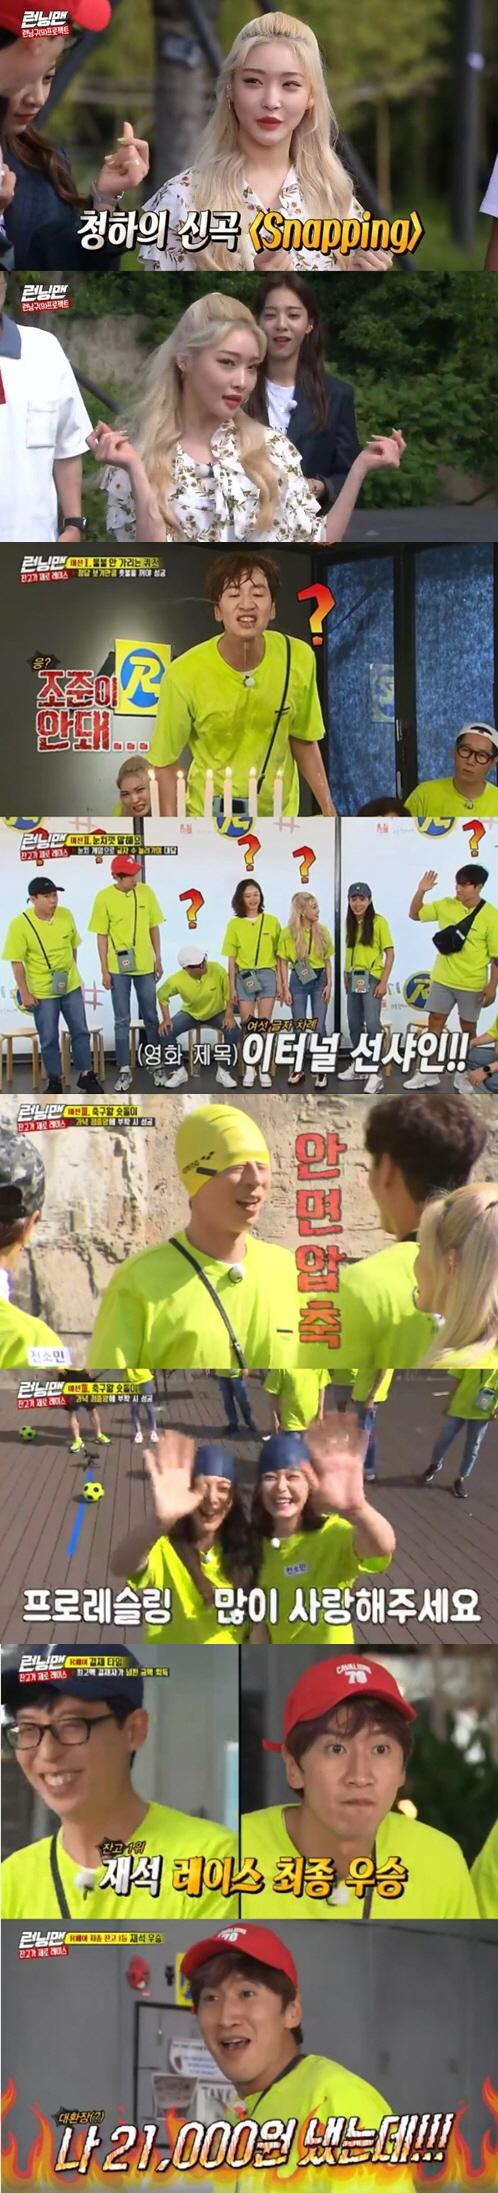 SBS Running Man recorded the highest audience rating of 8% per minute.According to Nielsen Korea, the ratings agency Running Man broadcast on the 23rd soared to the highest audience rating of 8% per minute, and the 2049 target audience rating, which is an important indicator of major advertising officials, recorded 4.1% (based on the second part of the Seoul Capital Areas audience rating), topping the Masked Wang and The presidents ear is the donkey ear did.The average audience rating was 5.1% in the first part and 7% in the second part (based on the audience rating of households in the Seoul Capital Area).The show was decorated with Zero Race and was accompanied by Best Friend singer Cheongha and actor Seol In-ah as guests. In this race, the members received a mission phone with 30,000 won each.If you want to pay for food expenses by going around the restaurant, you should pay privately with R Pay. If the final amount is insufficient after payment, you should pay the shortest amount of money with the last person in each round mission.However, if the final amount is overflowing, the person who paid the highest amount will acquire all the difference.The members had a fierce operation from the beginning, especially in the last round, there was a penalty to write a humiliation hat.With an unexpected big smile, each member laughed with an extreme sense of fighting when the payment order was in the order of payment, and this scene was the best one minute with the highest audience rating of 8% per minute.On the other hand, Seol In-ah was punished for water bombs with a big payment every round, and Lee Kwang-soo made a strategy to all-in-one in the last mission, but he was pushed by Yoo Jae-Suk, who had more than 1,000 won in assets even though it was the same strategy.Ji Seok-jin was named as a companion penalty by Seol In-ah, and he was punished with Seol In-ah and Lee Kwang-soo.In addition, Cheongha and Seol In-ah have been performing a joint stage of 12 oclock already as a best friend, and Cheongha has attracted attention by releasing a new song Snapping for the first time.